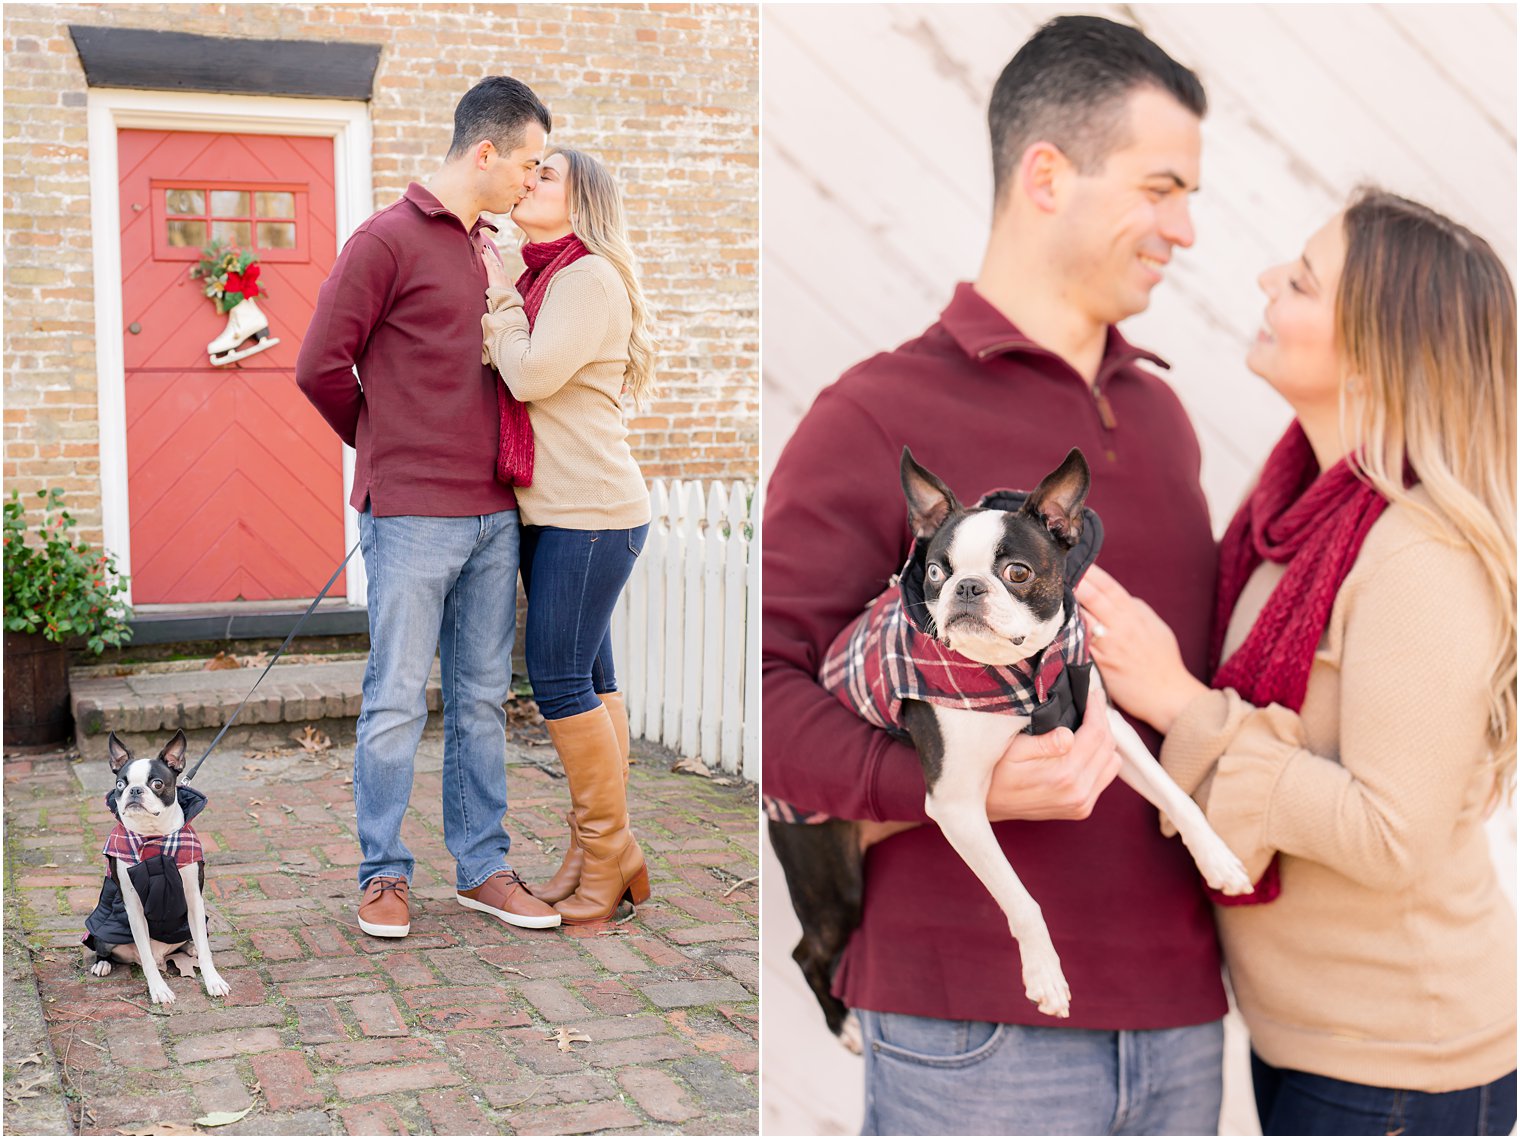 Cute engagement session with dog